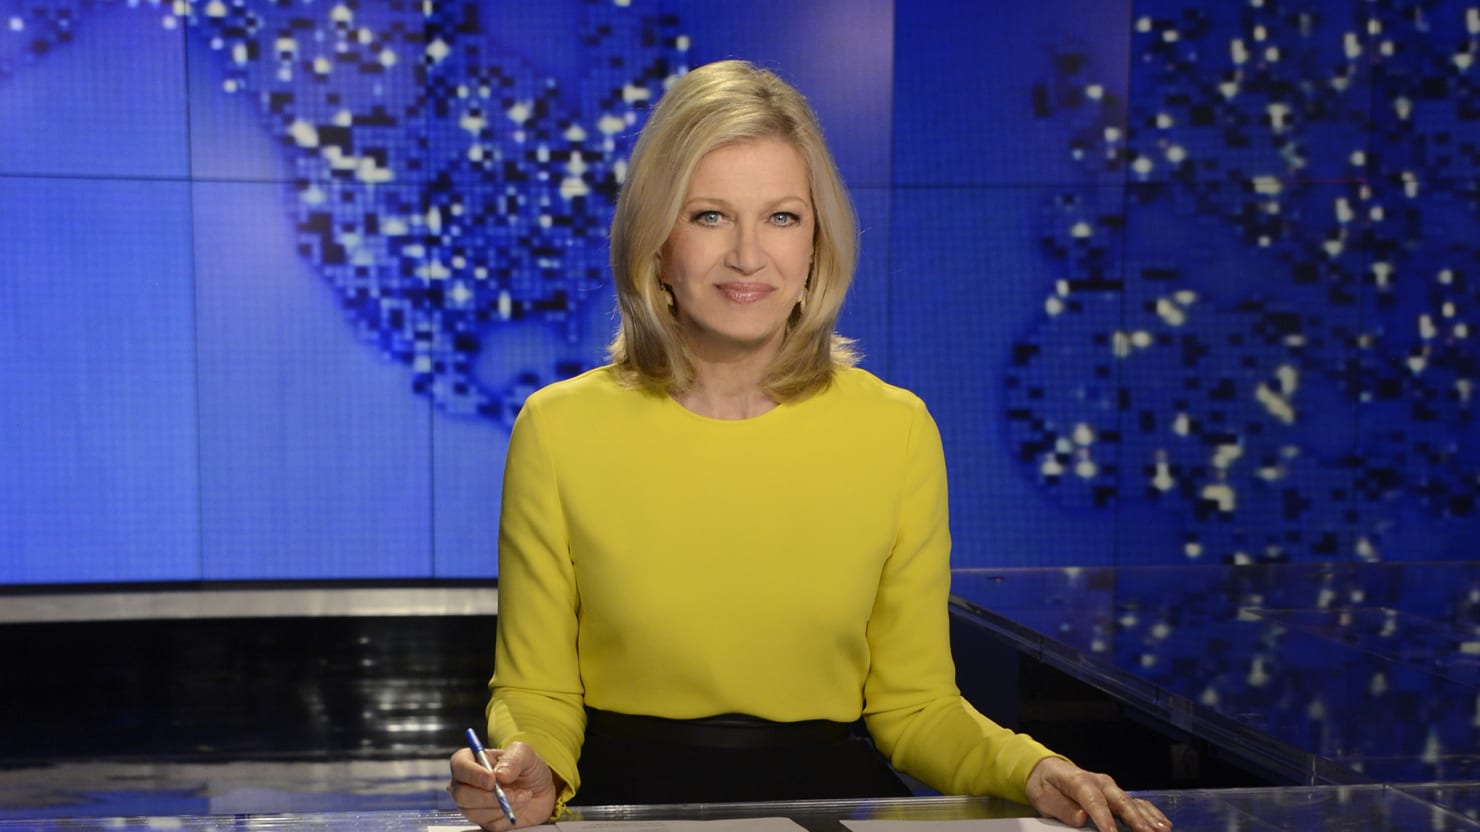 Diane Sawyer’s Swan Song: ABC World News Anchor’s Warm (and 